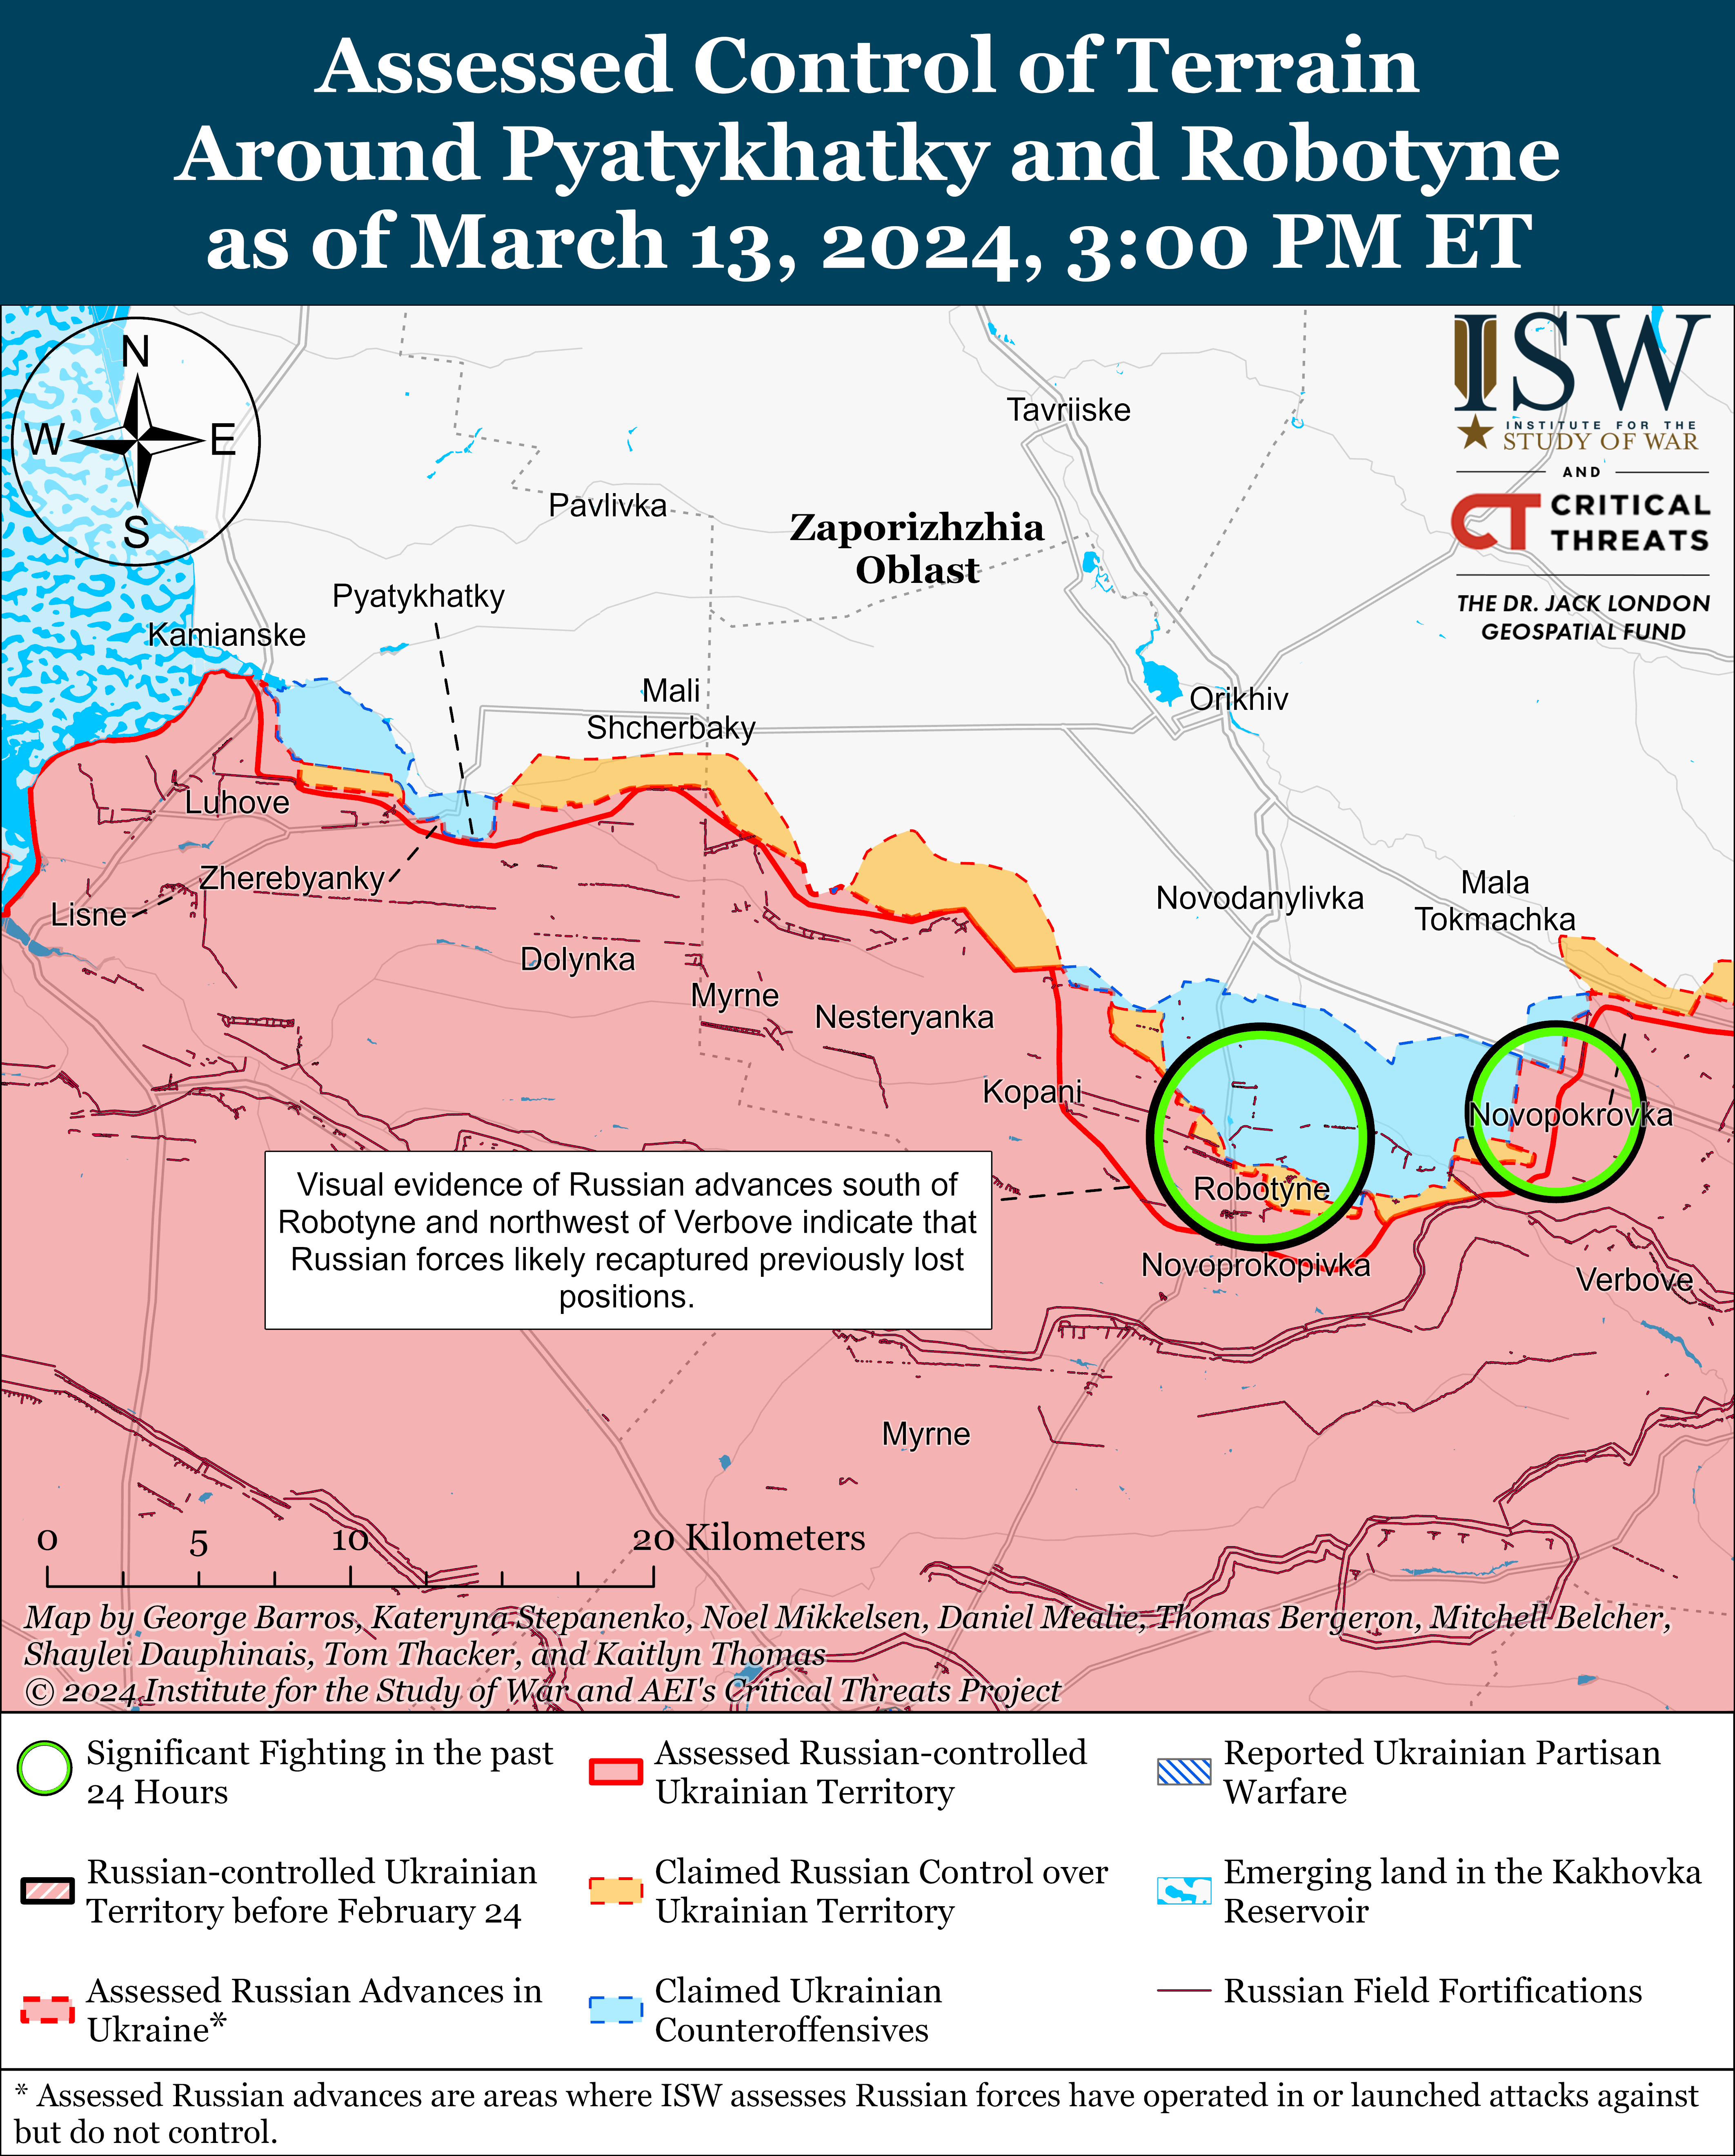 Pryatykhatky_and_Robotyne_Battle_Map_Draft_March_13_2024.png